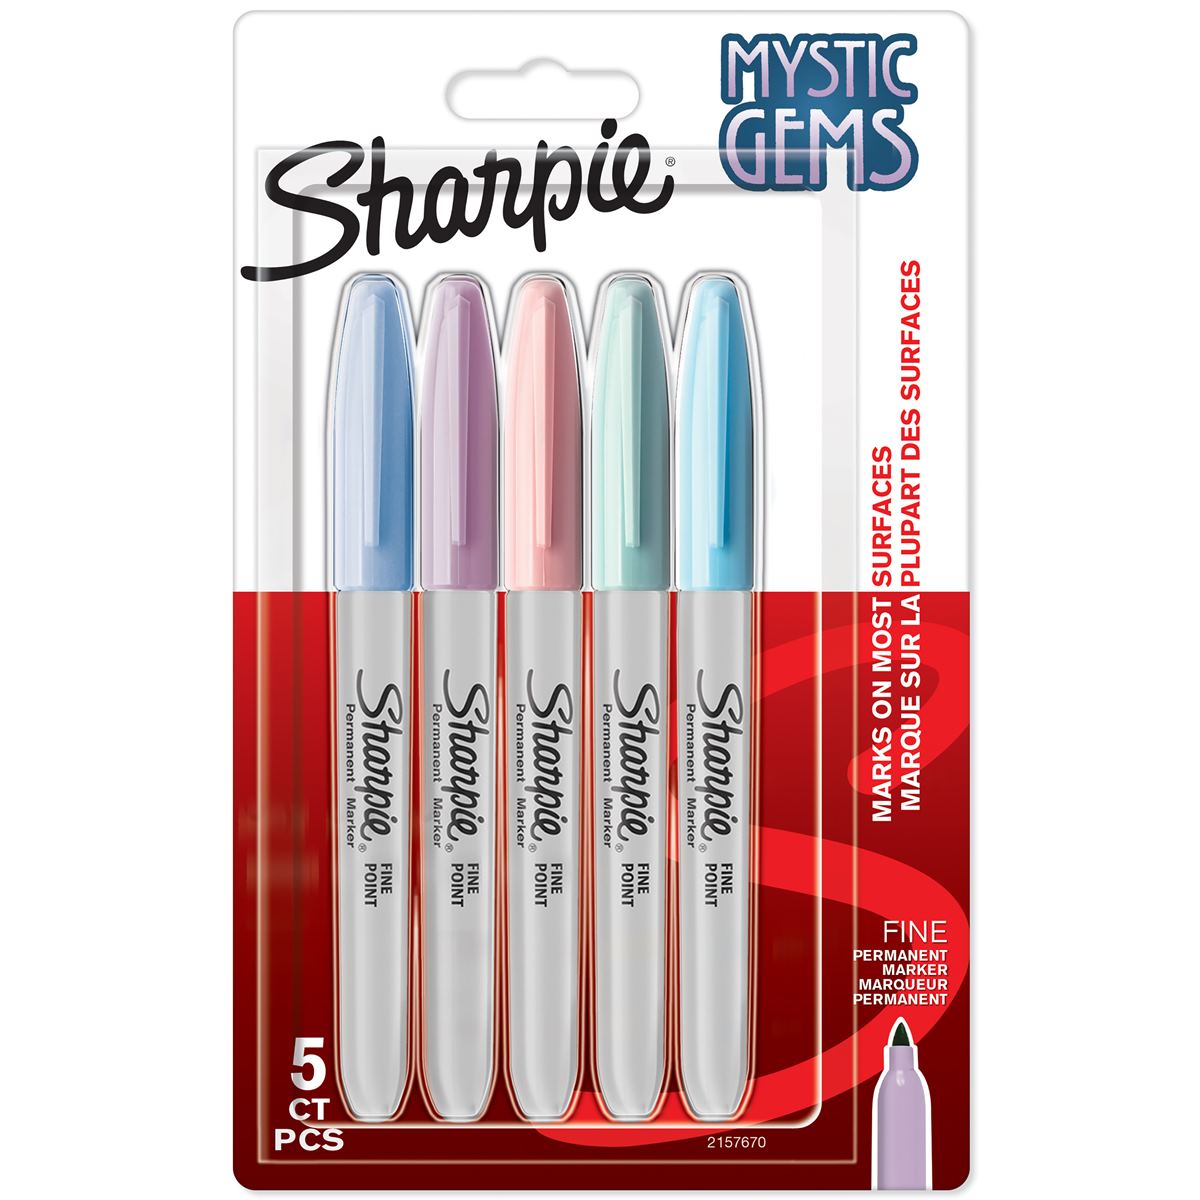 Sharpie Permanent Markers Special Edition Mystic Gems - Pack of 5